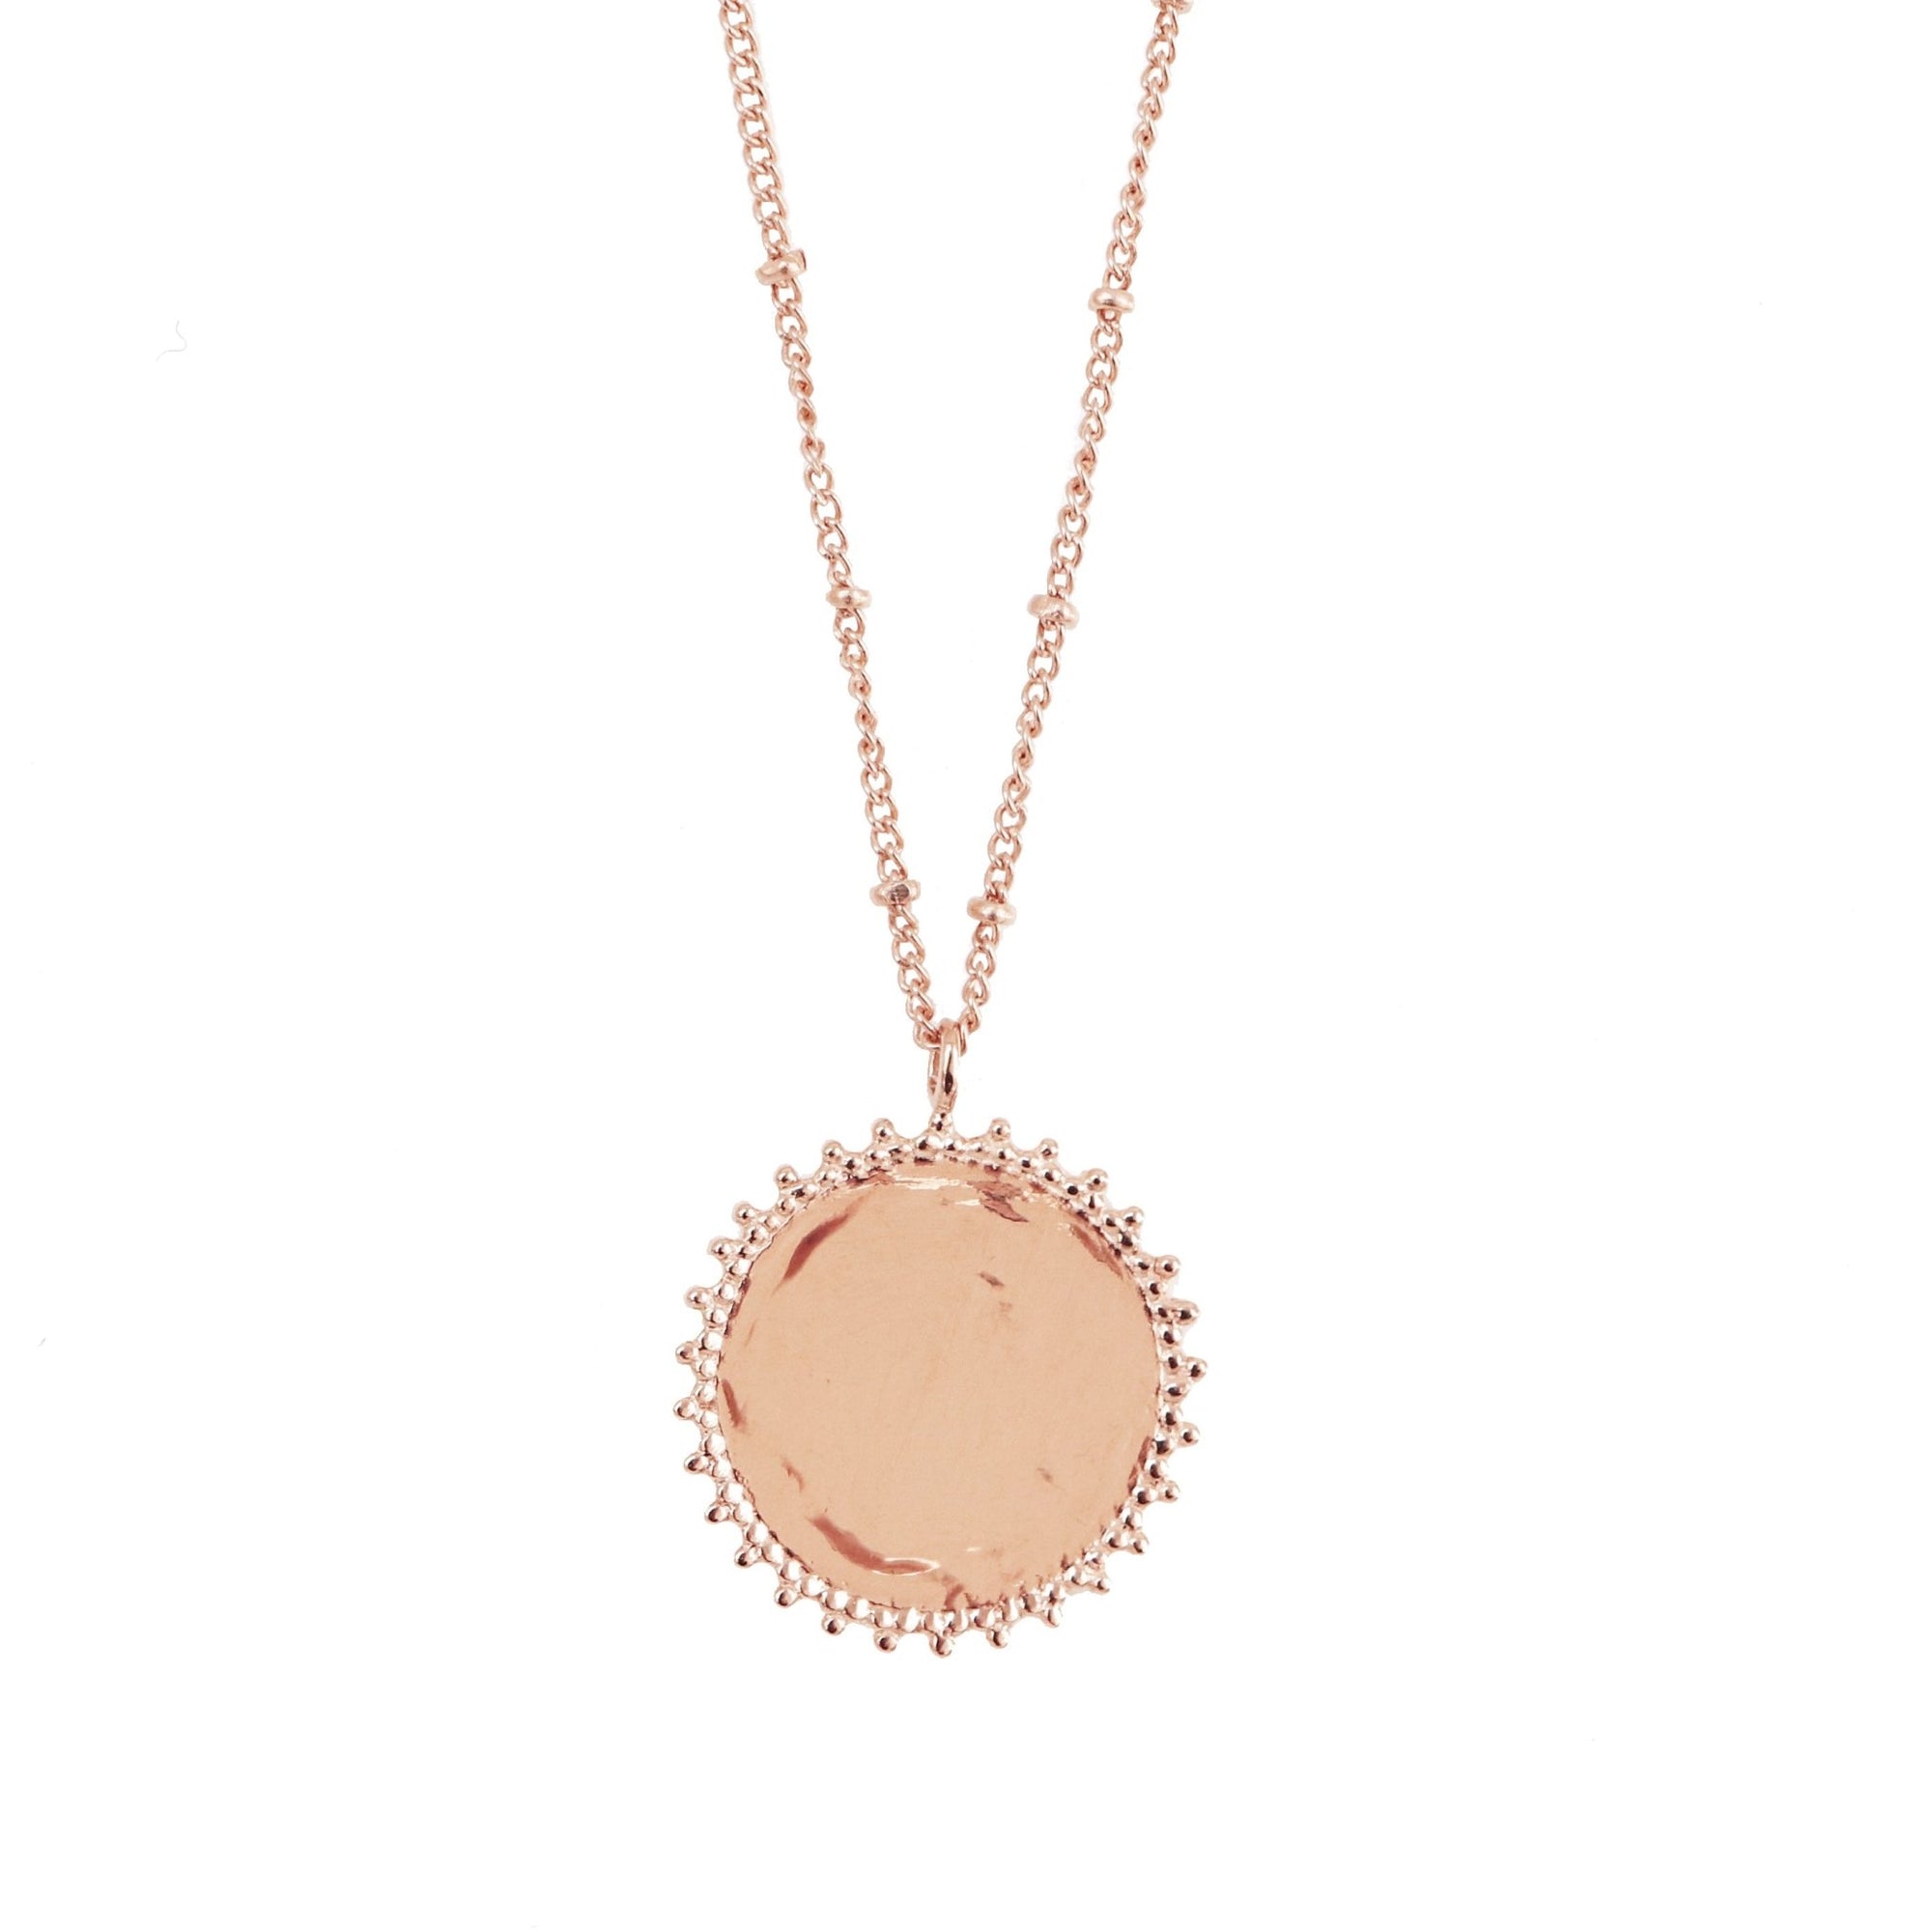 BELIEVE SOLEIL COIN PENDANT NECKLACE - ROSE GOLD - SO PRETTY CARA COTTER